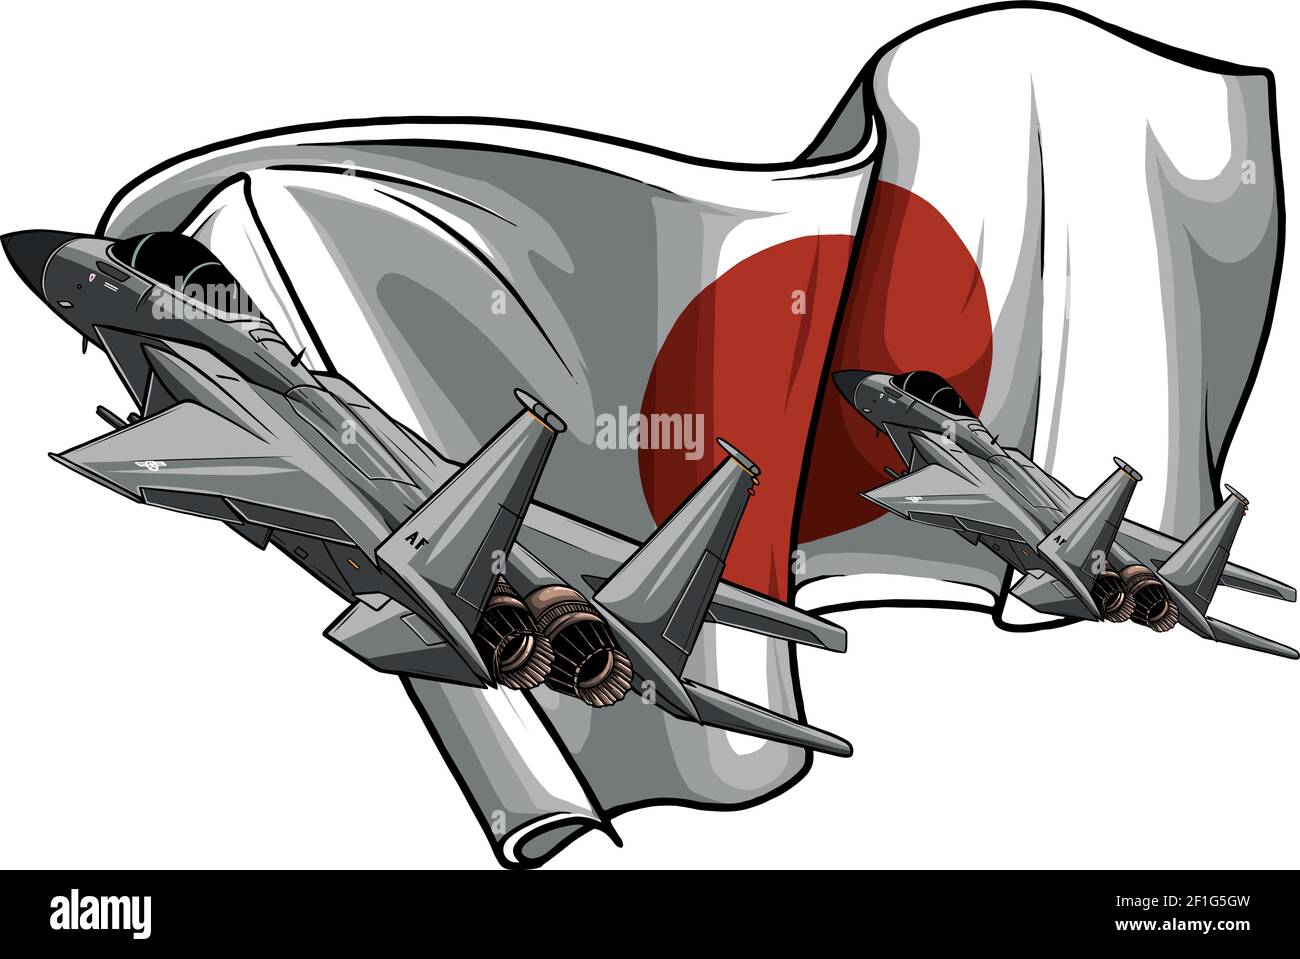 Military fighter jets with japan flag vector Stock Vector